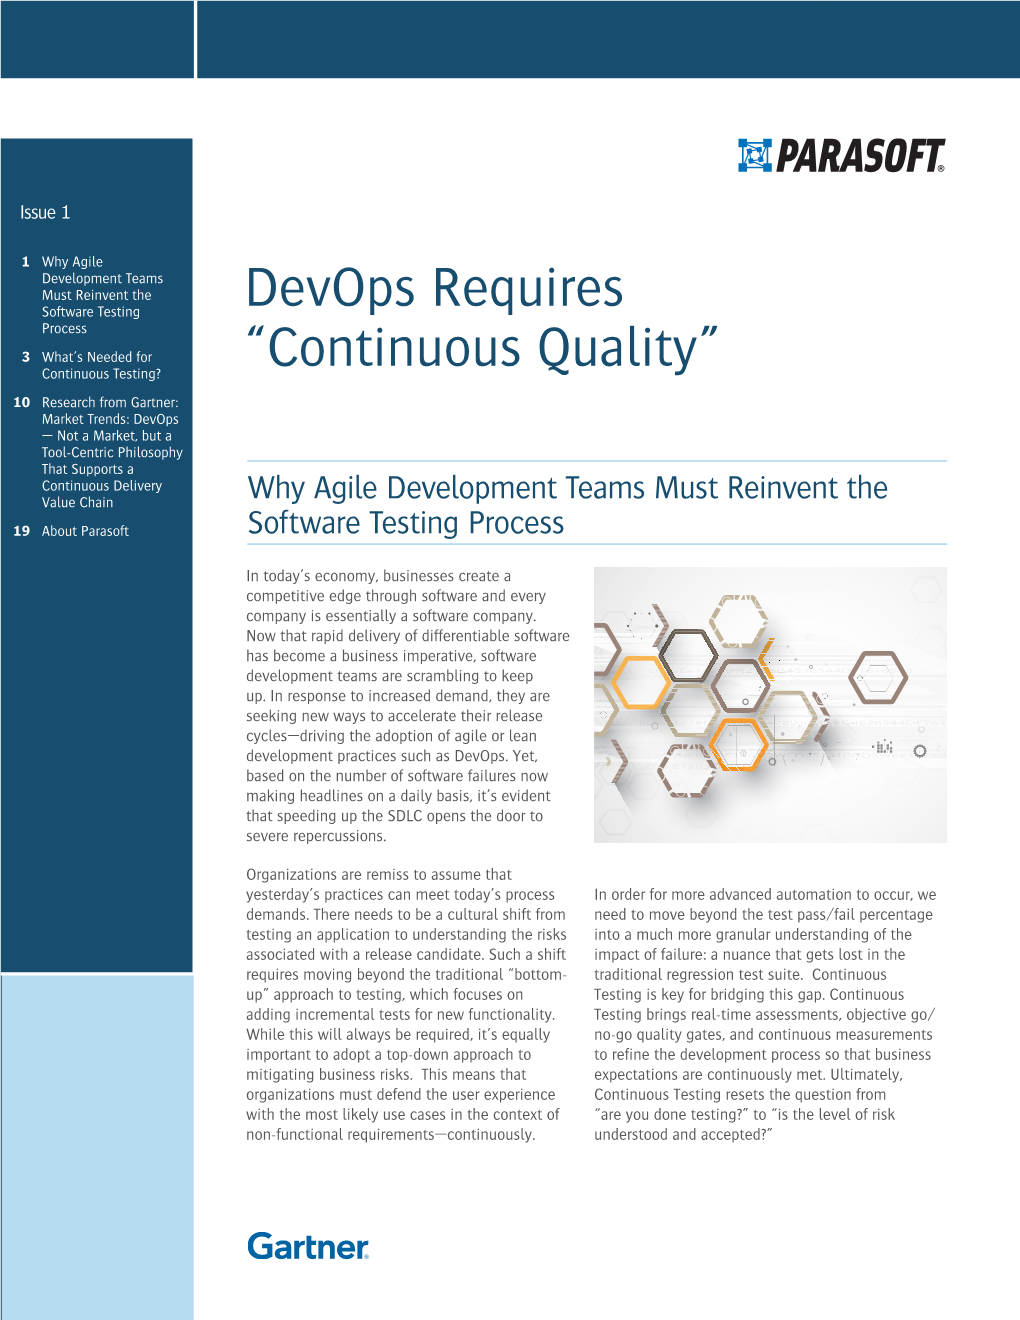 Devops Requires “Continuous Quality” Is Published by Parasoft